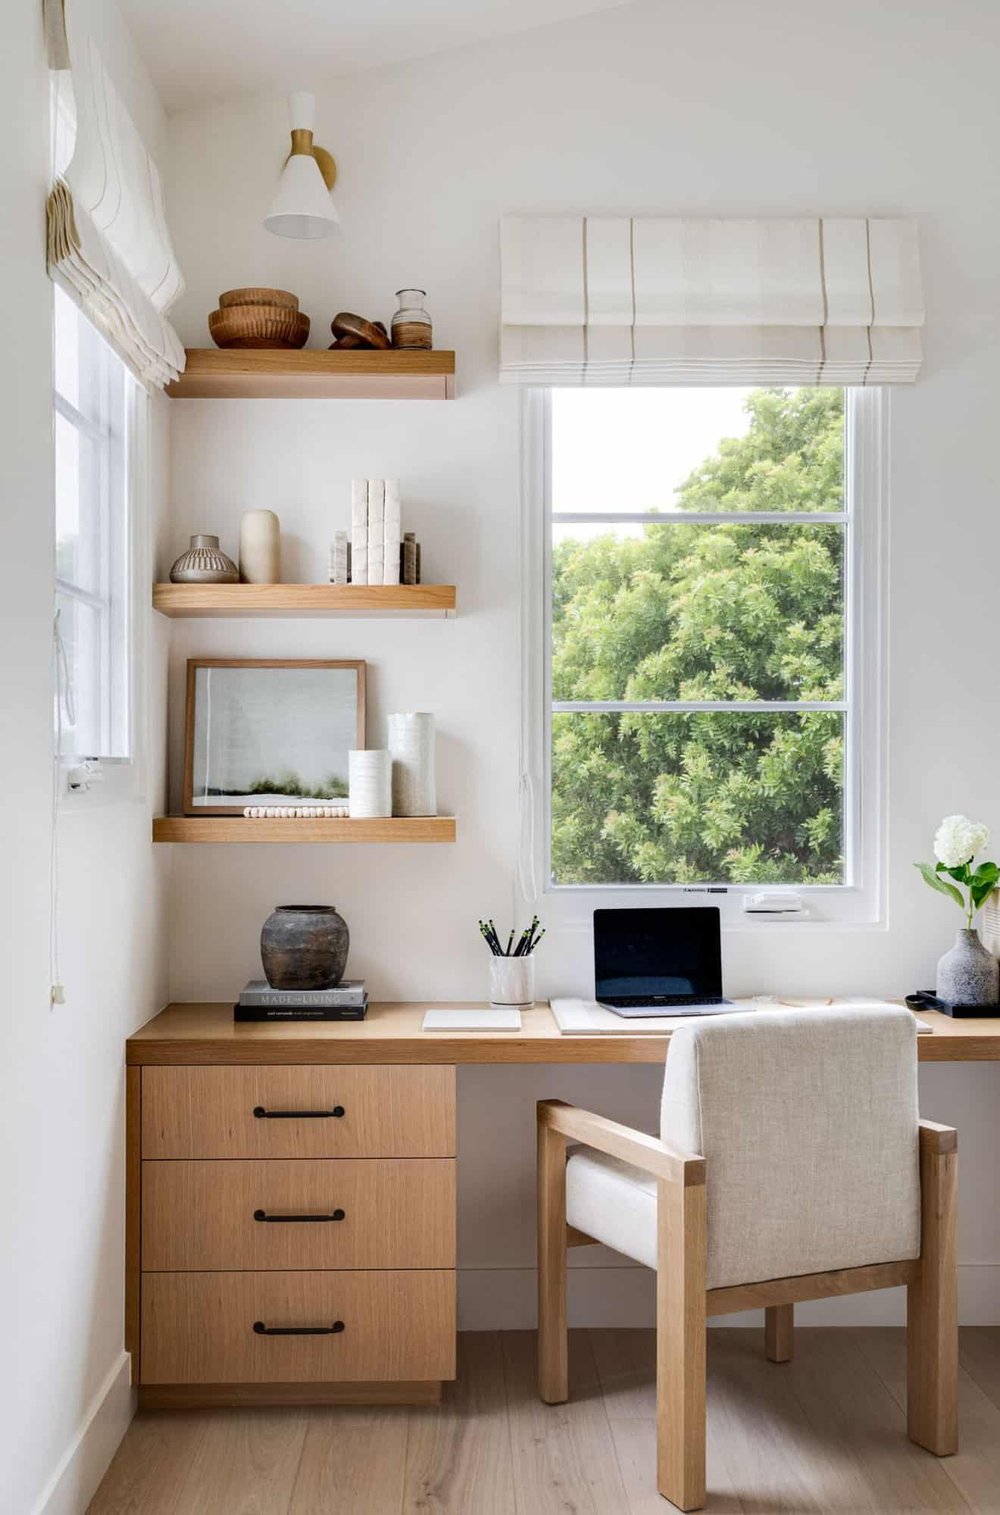 styling-your-shelves-to-perfection-homeoffice-lindyegalloway.jpeg